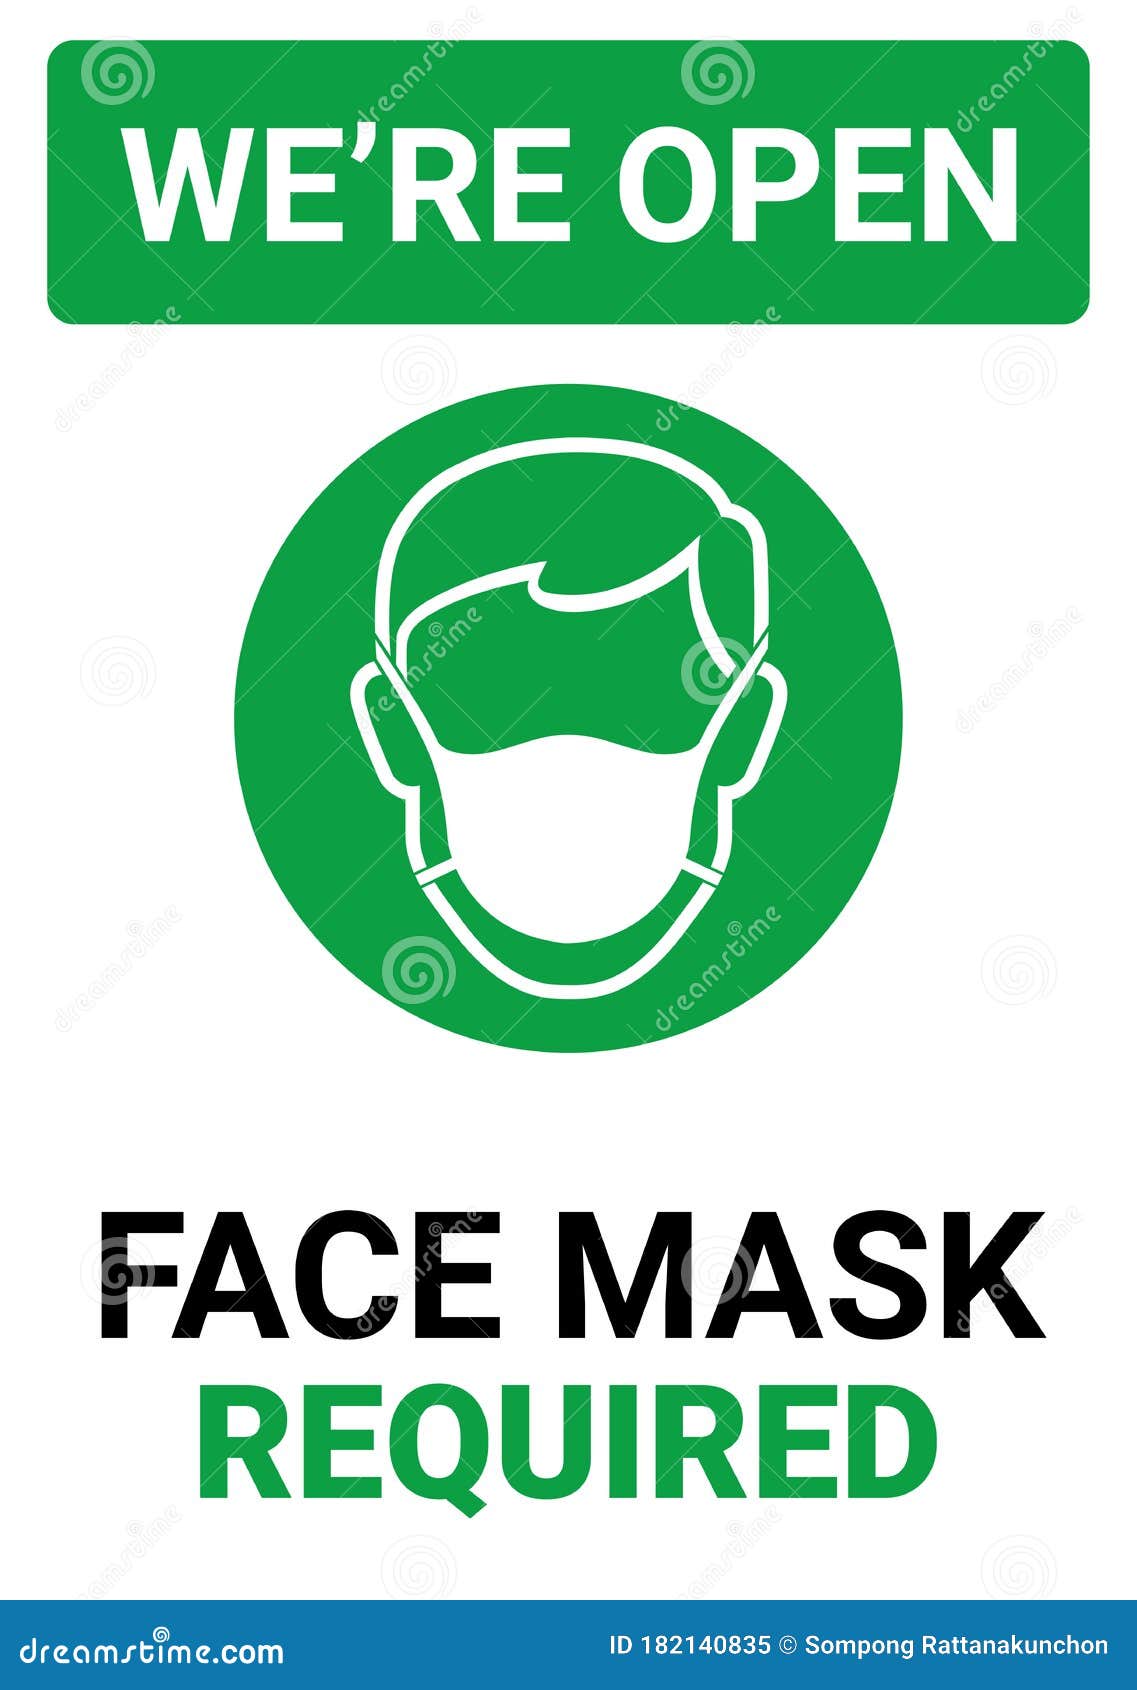 please wear a face mask and keep your distance to protect from covid-19